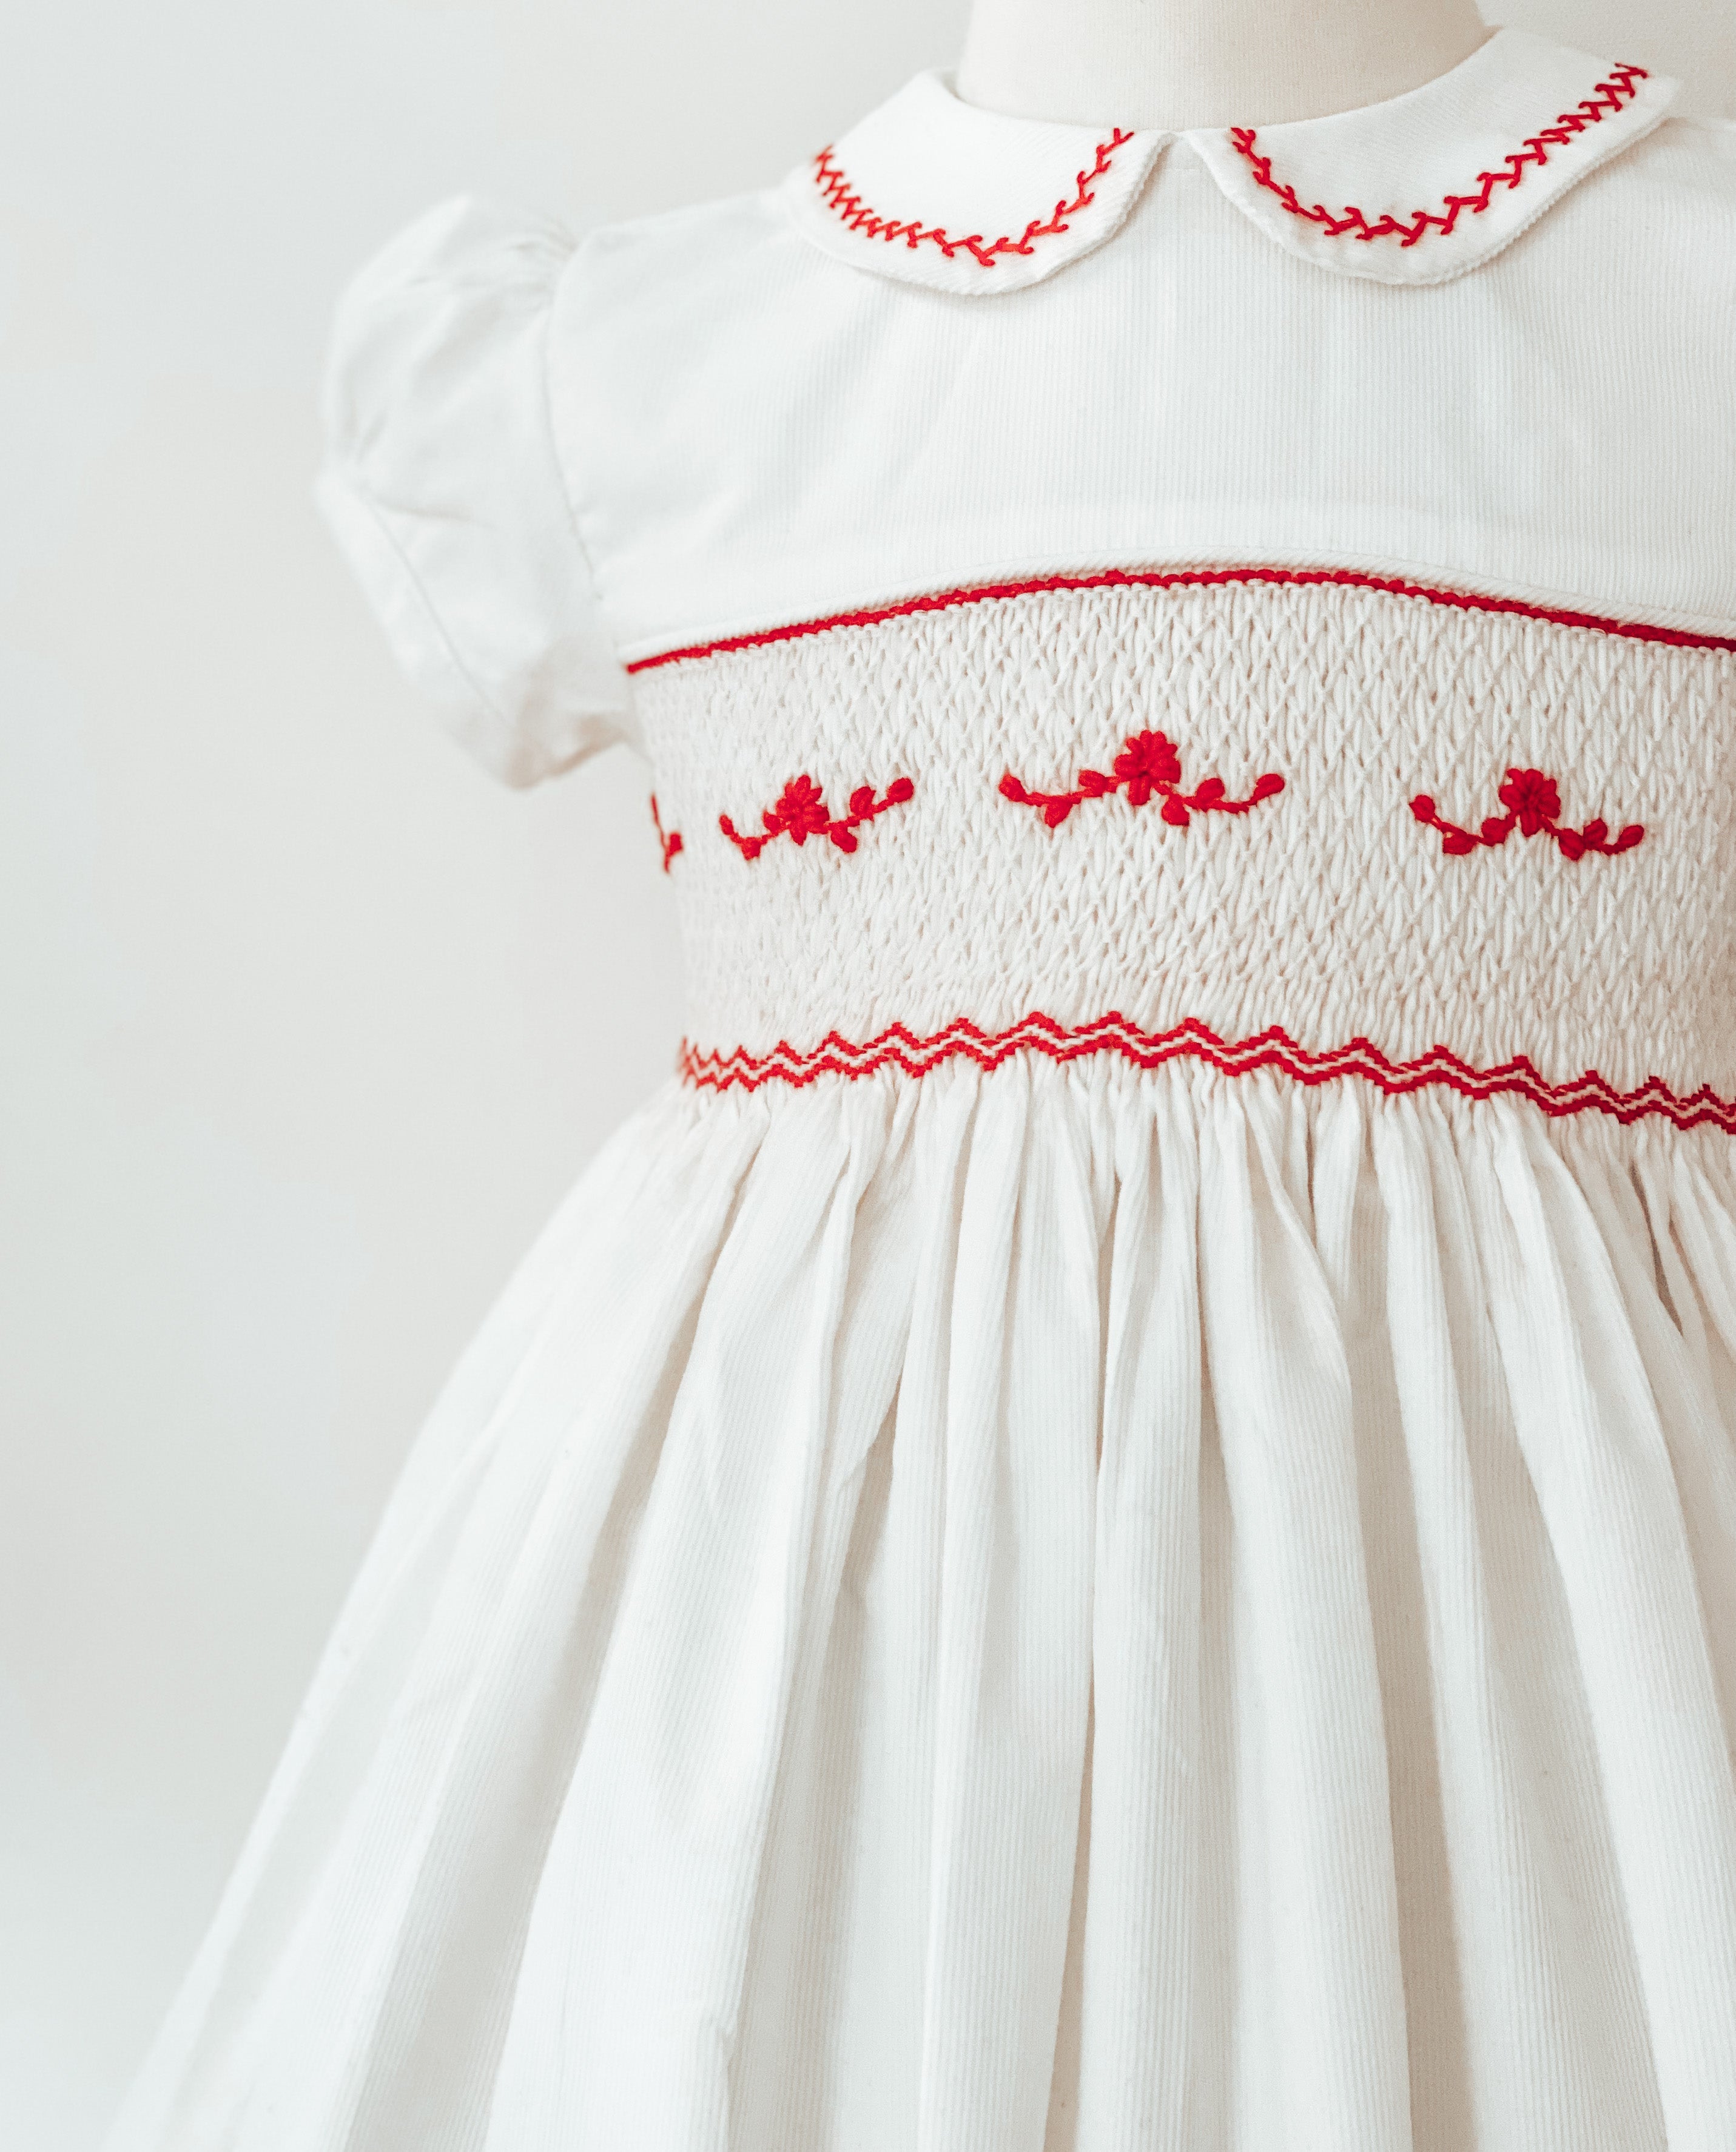 ** SECONDS SALE** The hand smocked ANNE dress - White